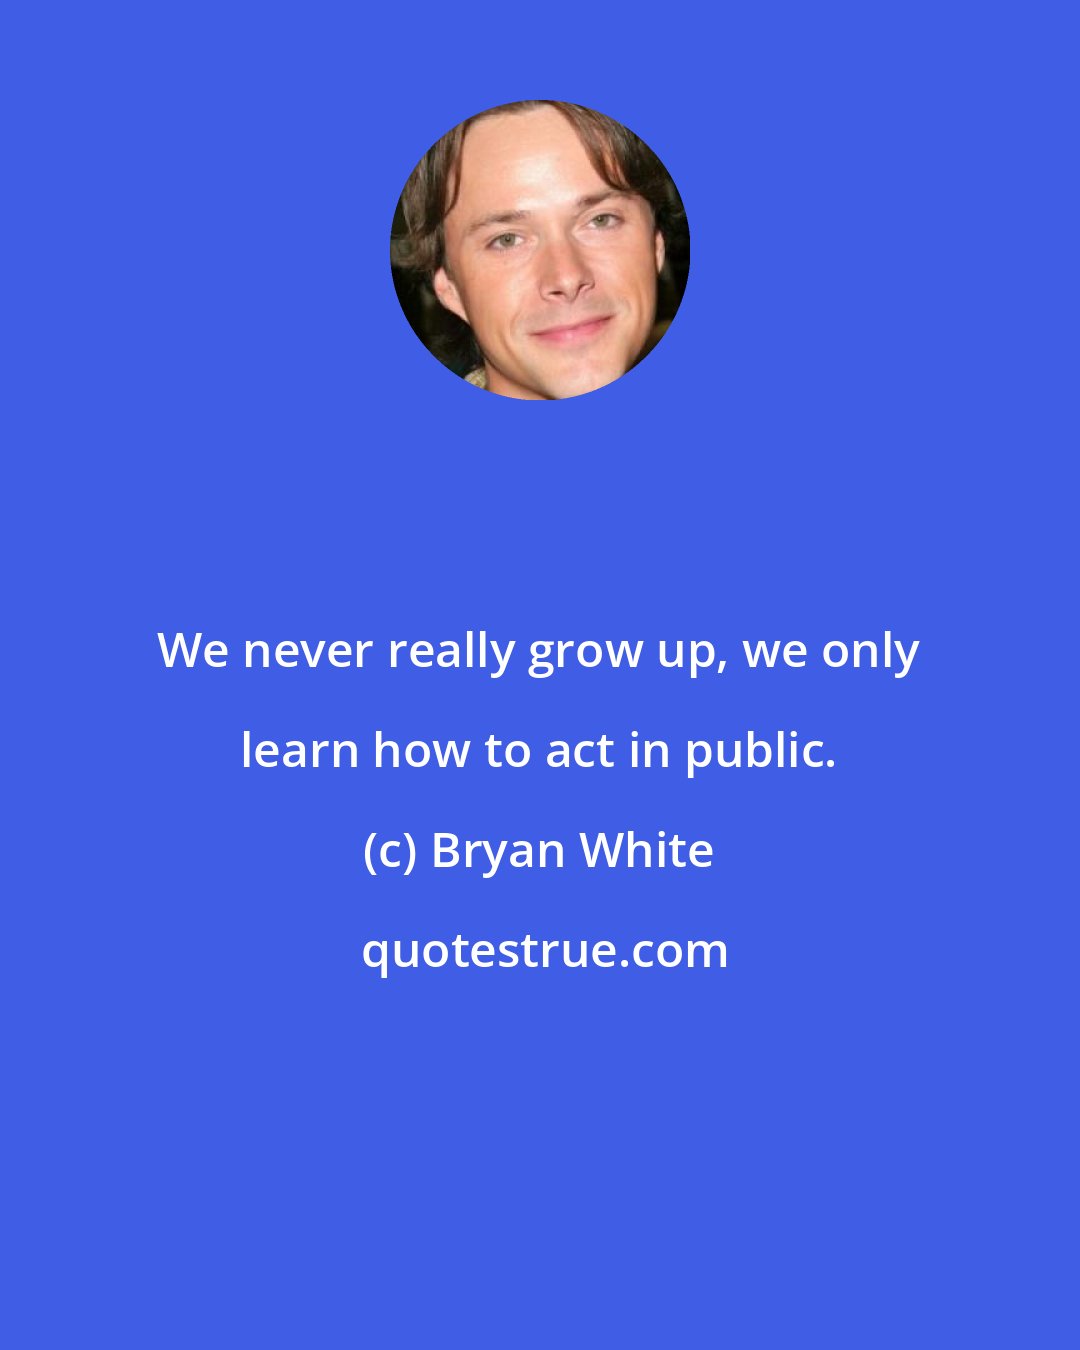 Bryan White: We never really grow up, we only learn how to act in public.